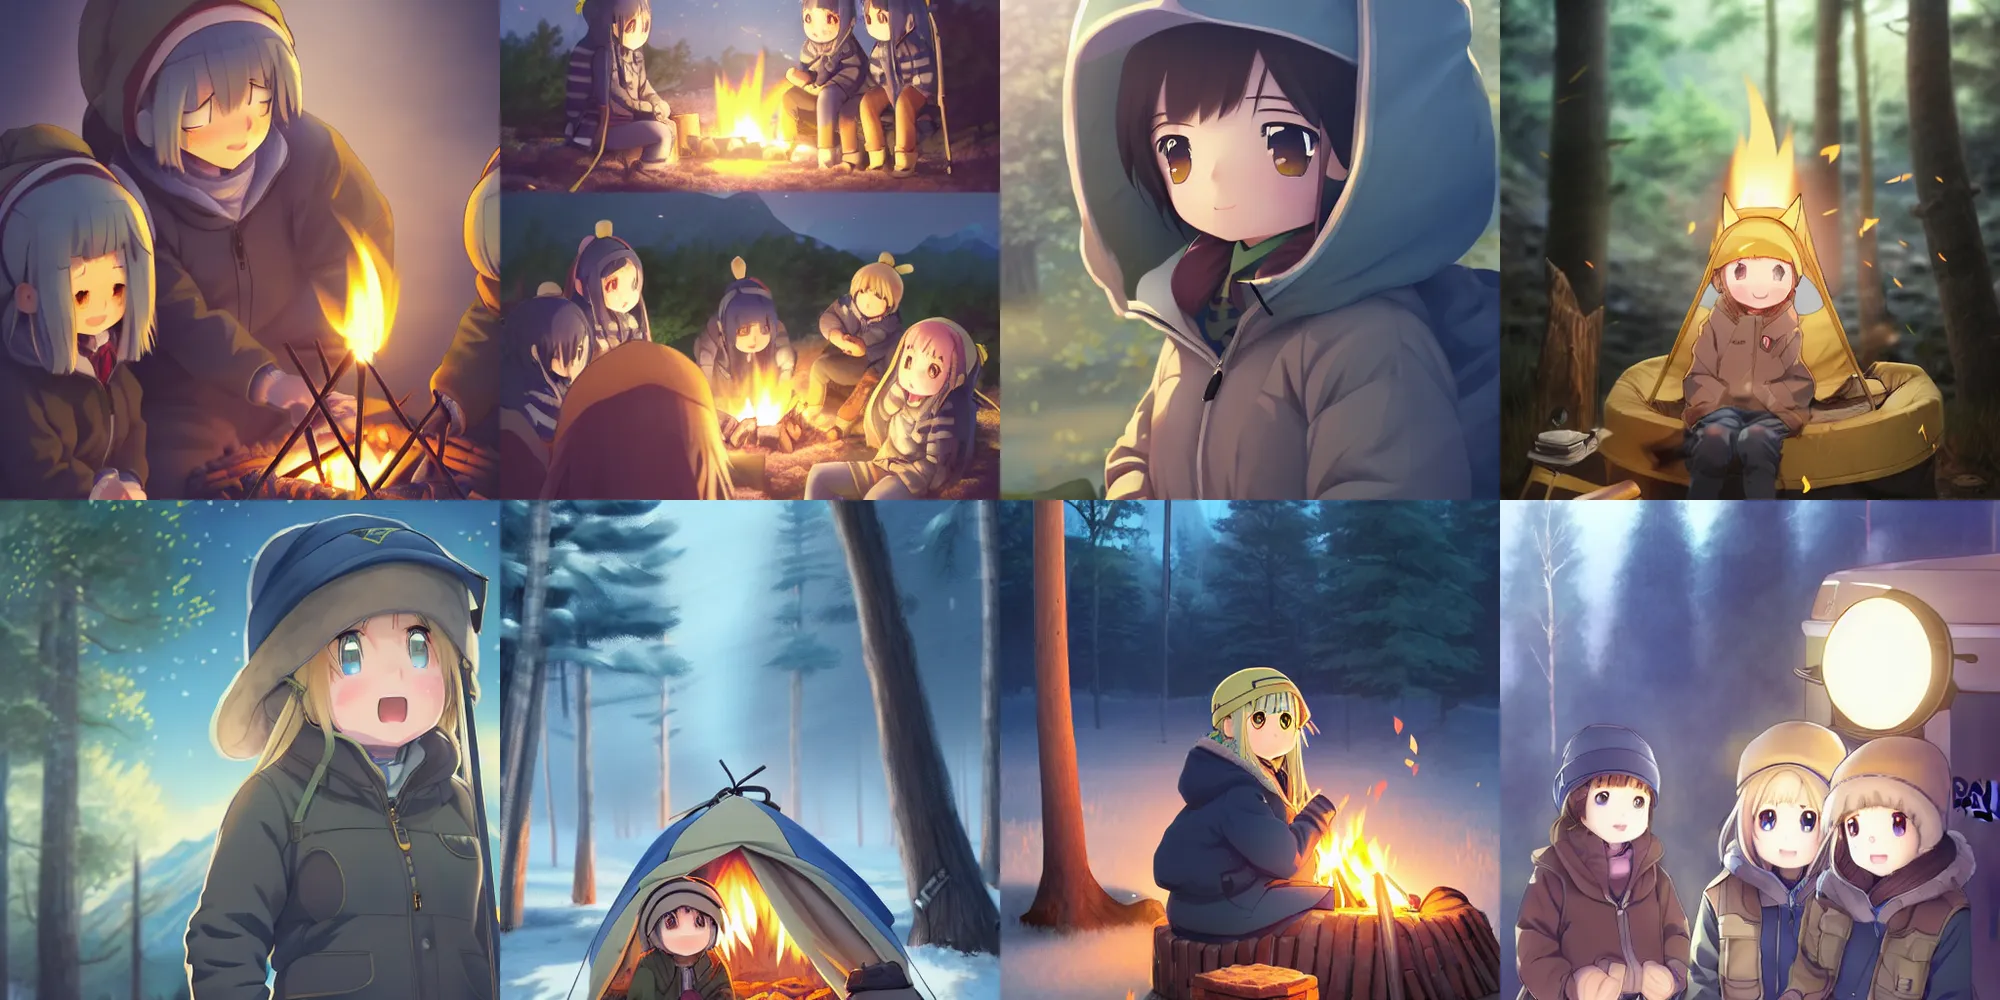 Laid Back Camp (Yurukyan) Anime Fabric Wall Scroll Poster (16x21) Inches  [an] Laid Back Camp-3 : Amazon.ca: Home